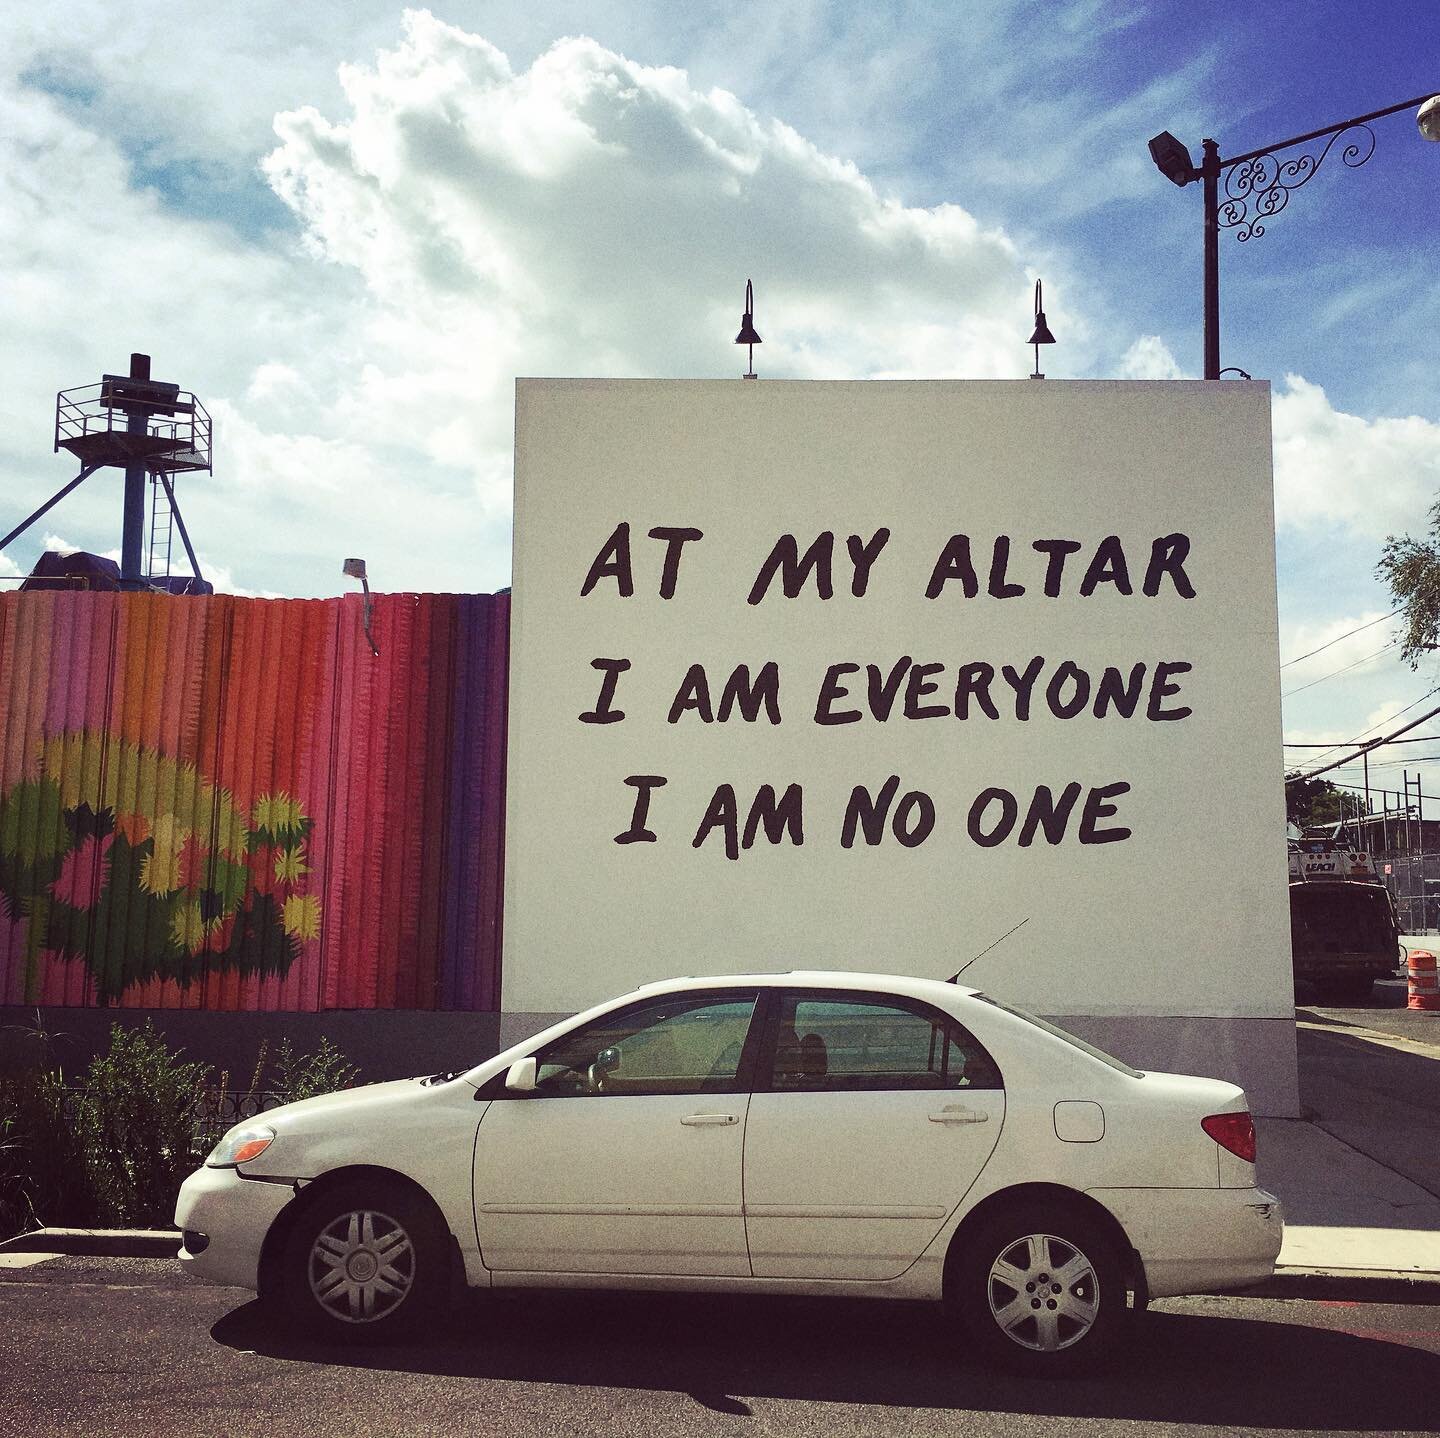 It&rsquo;s a nice surprise when board messages speak to us for the sake of provoking a new perspective. They give something and don&rsquo;t ask for anything in return.  #latergram #altar #self #nyc #bushwick #summer #quotes #street #art #everyone #no